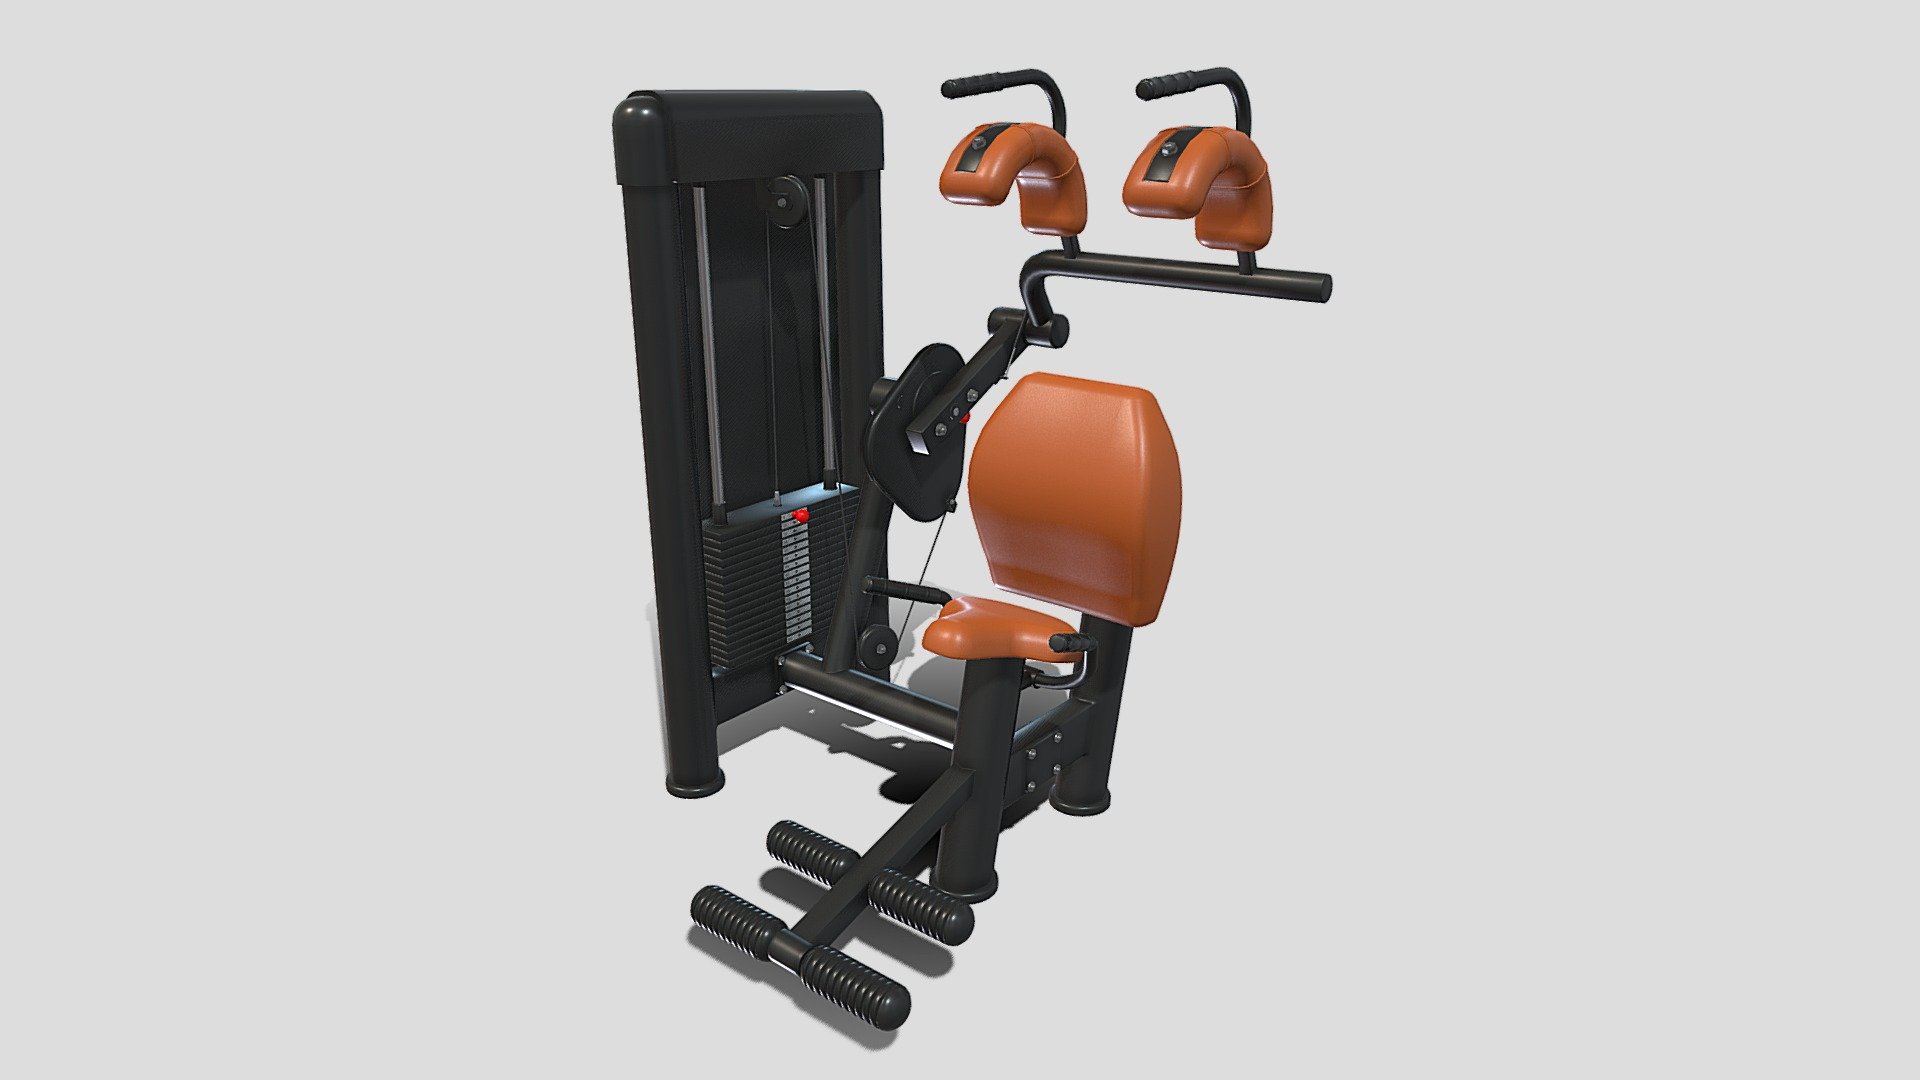 Gym machine 3d model built to real size, rendered with Cycles in Blender, as per seen on attached images. 

File formats:
-.blend, rendered with cycles, as seen in the images;
-.obj, with materials applied;
-.dae, with materials applied;
-.fbx, with materials applied;
-.stl;

Files come named appropriately and split by file format.

3D Software:
The 3D model was originally created in Blender 3.1 and rendered with Cycles.

Materials and textures:
The models have materials applied in all formats, and are ready to import and render.
Materials are image based using PBR, the model comes with five 4k png image textures.

Preview scenes:
The preview images are rendered in Blender using its built-in render engine &lsquo;Cycles'.
Note that the blend files come directly with the rendering scene included and the render command will generate the exact result as seen in previews.

General:
The models are built mostly out of quads.

For any problems please feel free to contact me.

Don't forget to rate and enjoy! - Upper ab machine - Buy Royalty Free 3D model by dragosburian 3d model